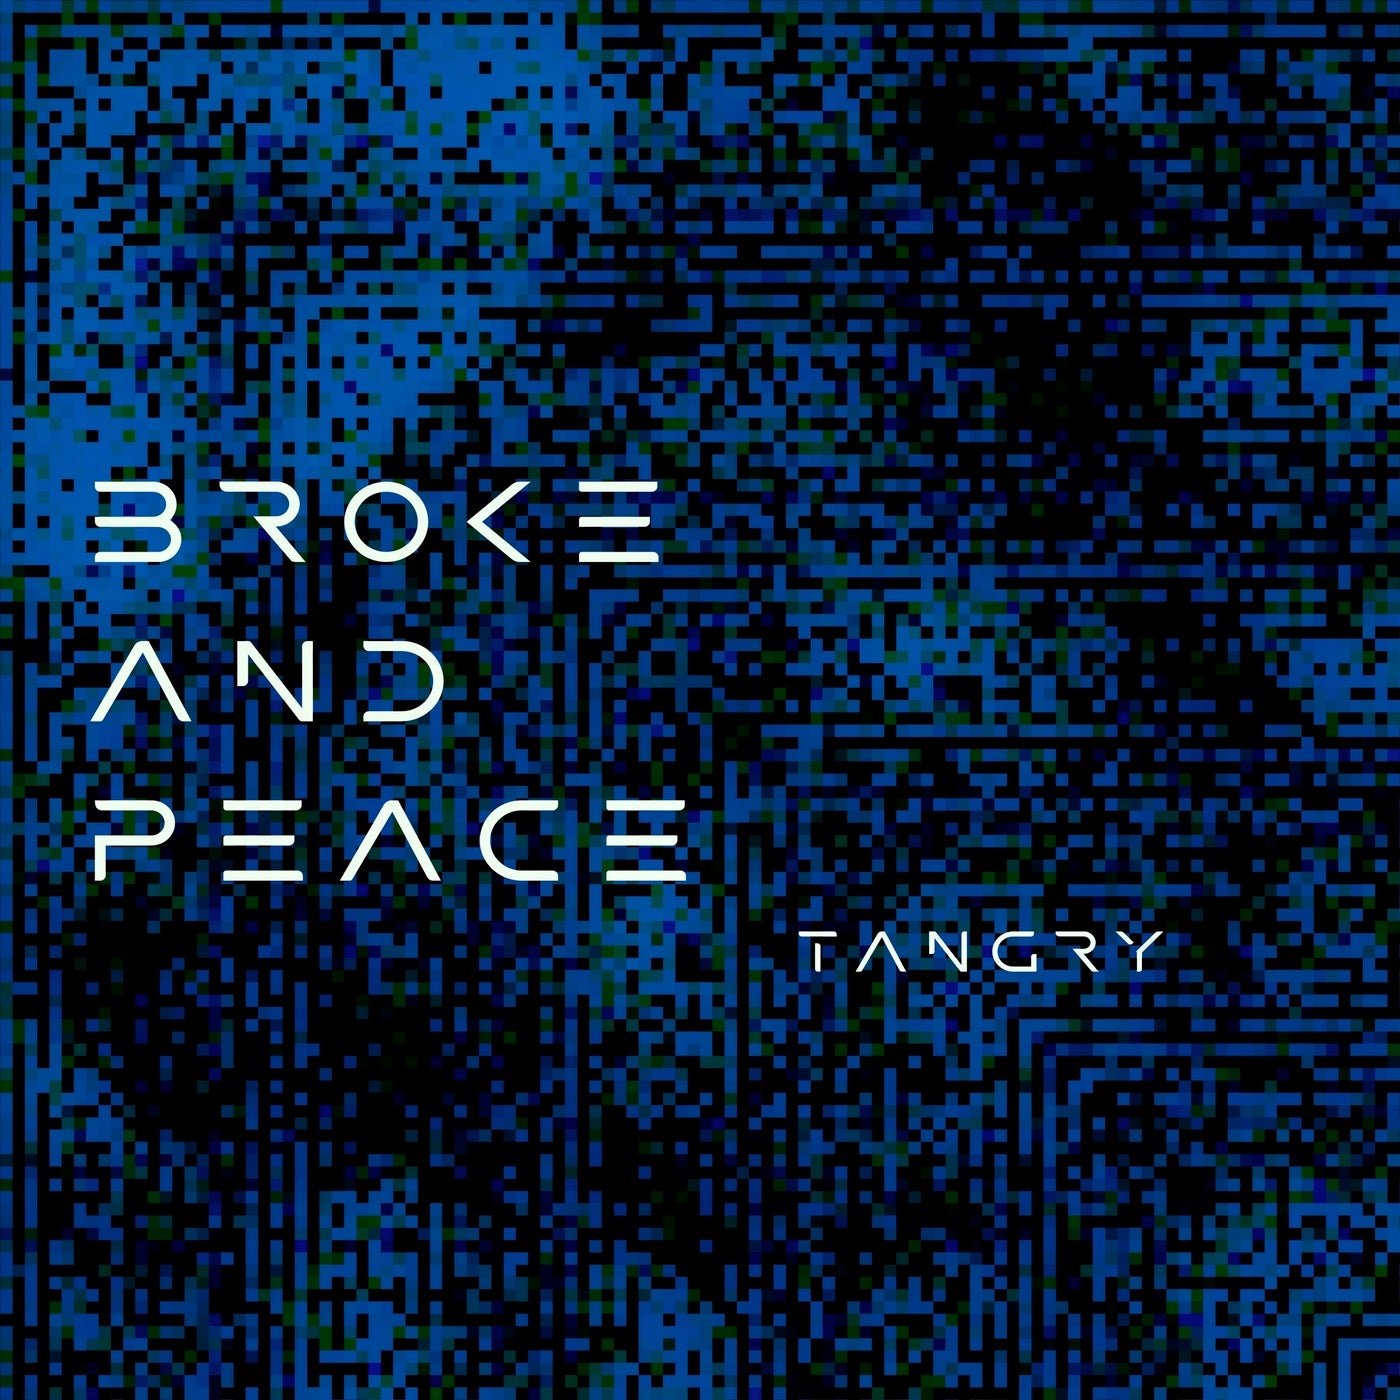 Broke and Peace